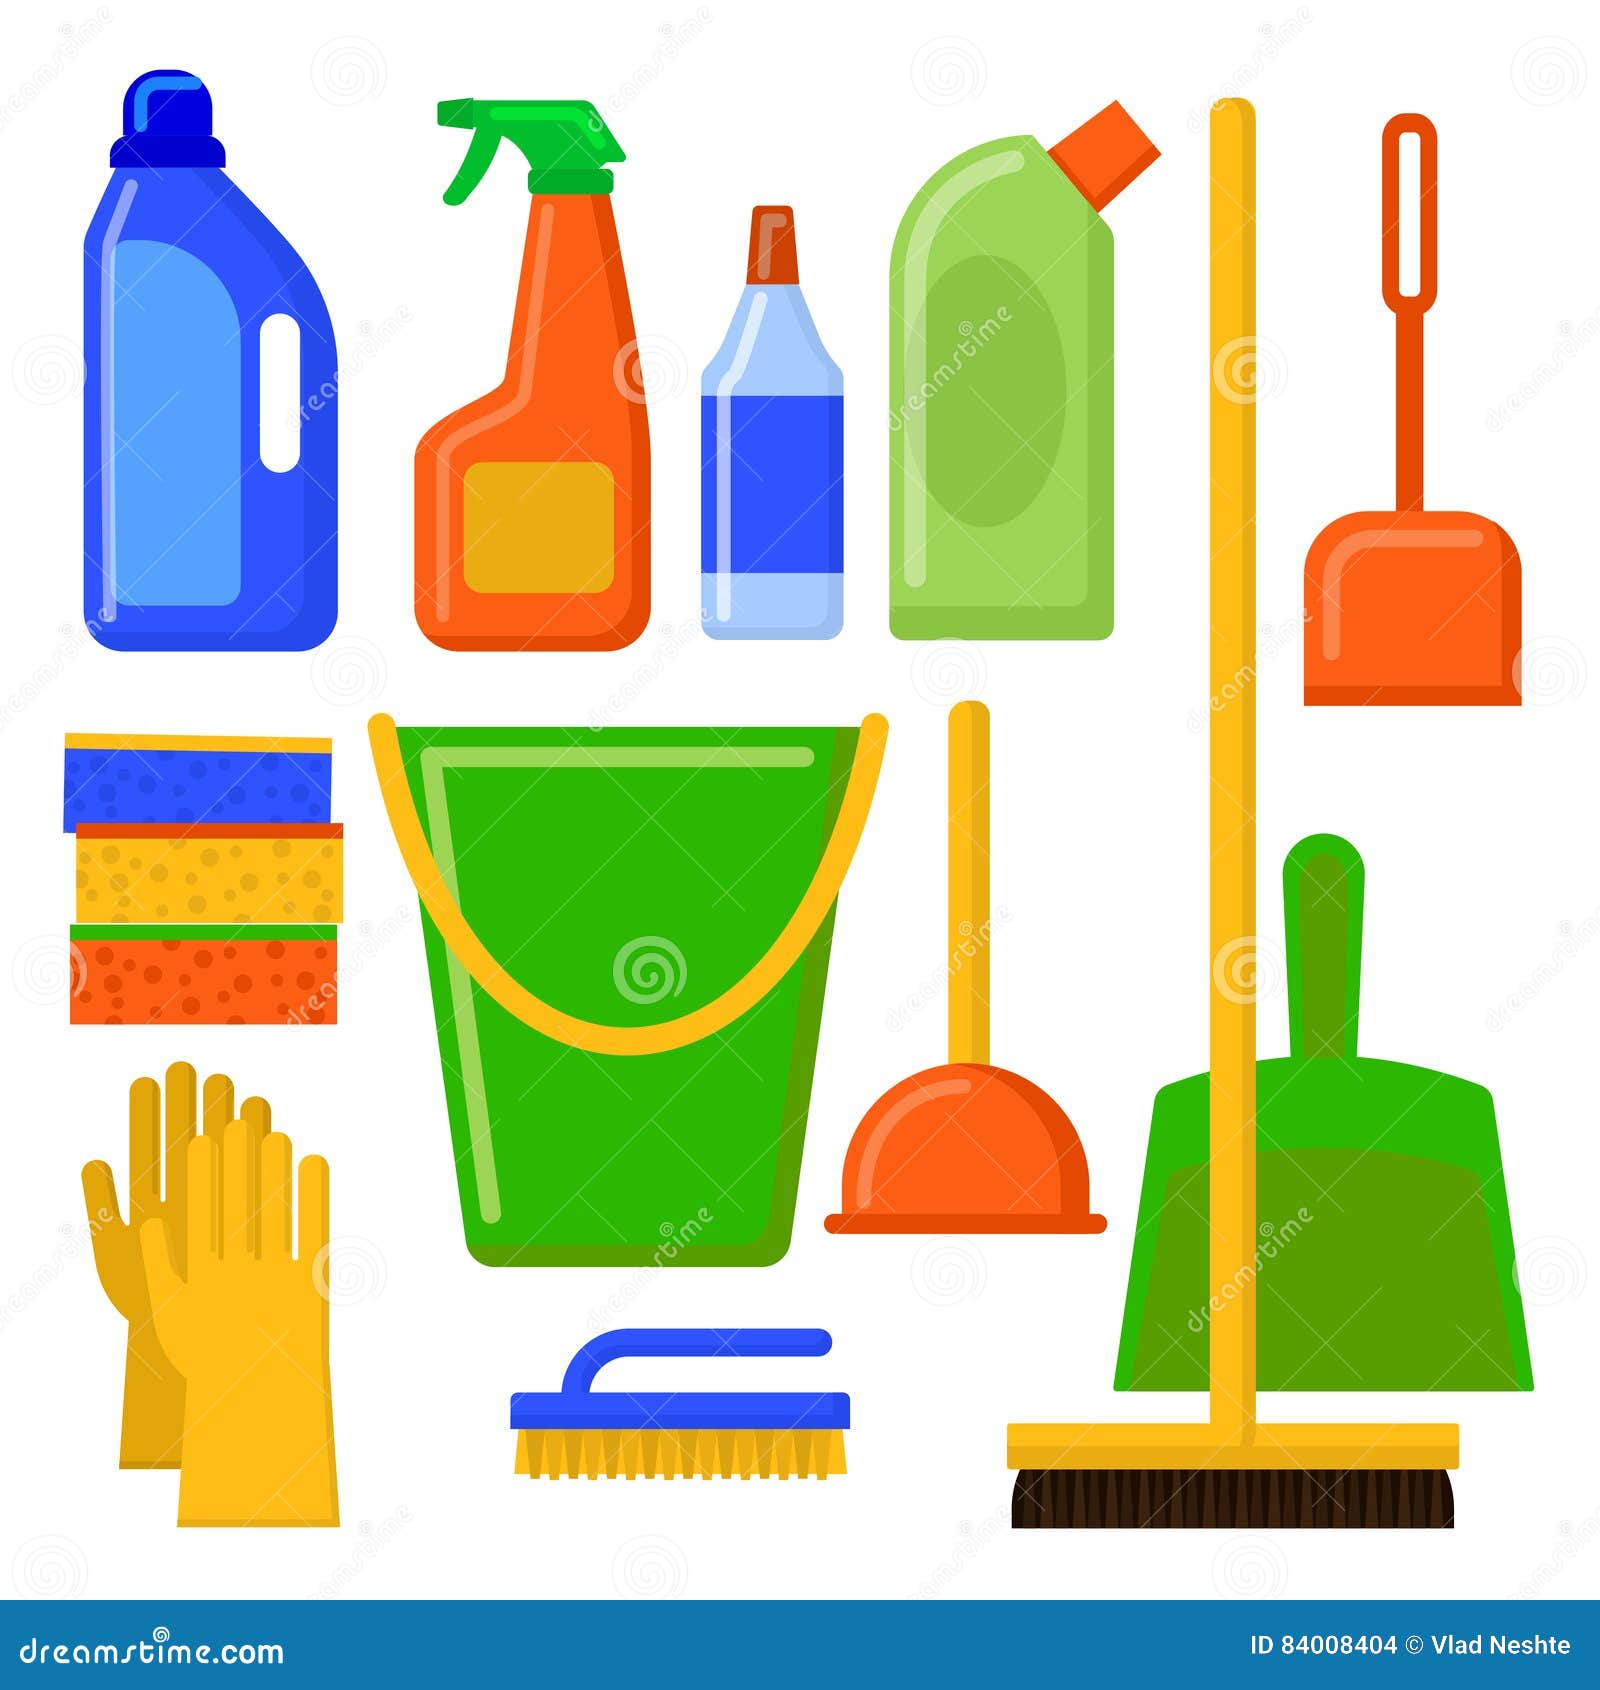 https://thumbs.dreamstime.com/z/house-cleaning-tools-cleaning-elements-home-appliances-icons-set-vector-illustration-flat-style-84008404.jpg